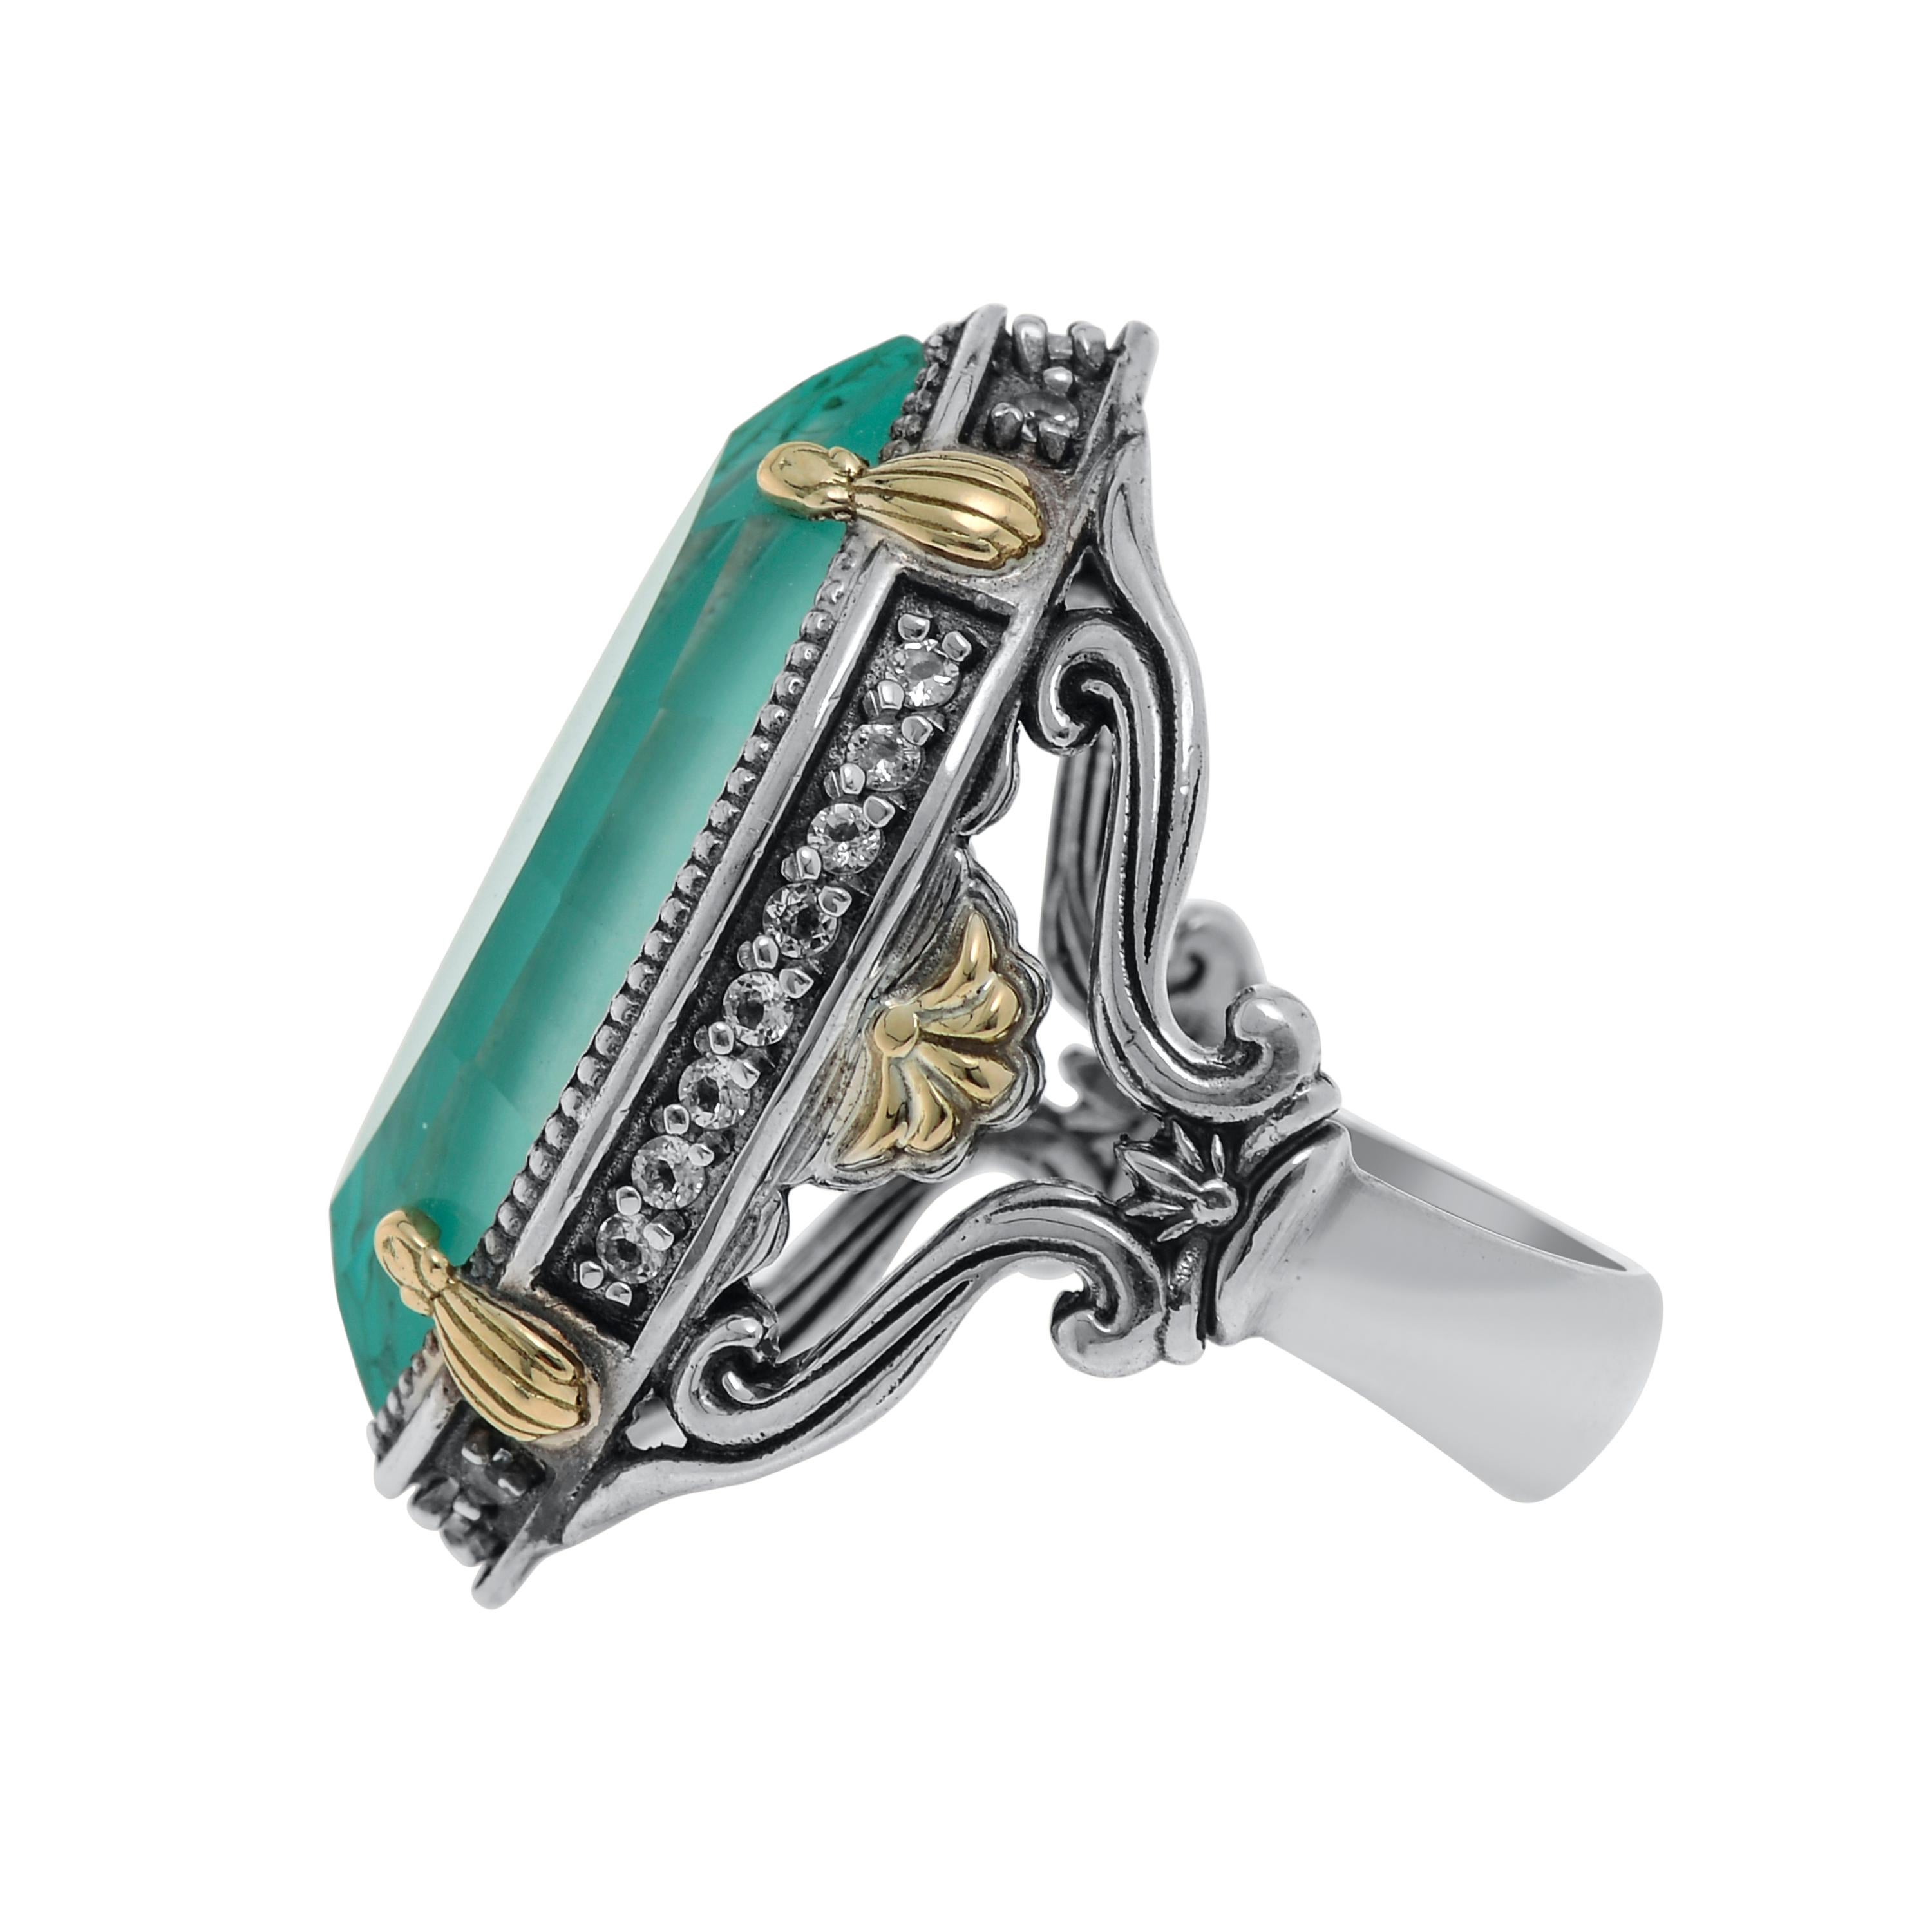 Contemporary Konstantino S. Silver & 18K Gold, Chalcedony & Topaz Doublet Ring sz 6.75 For Sale